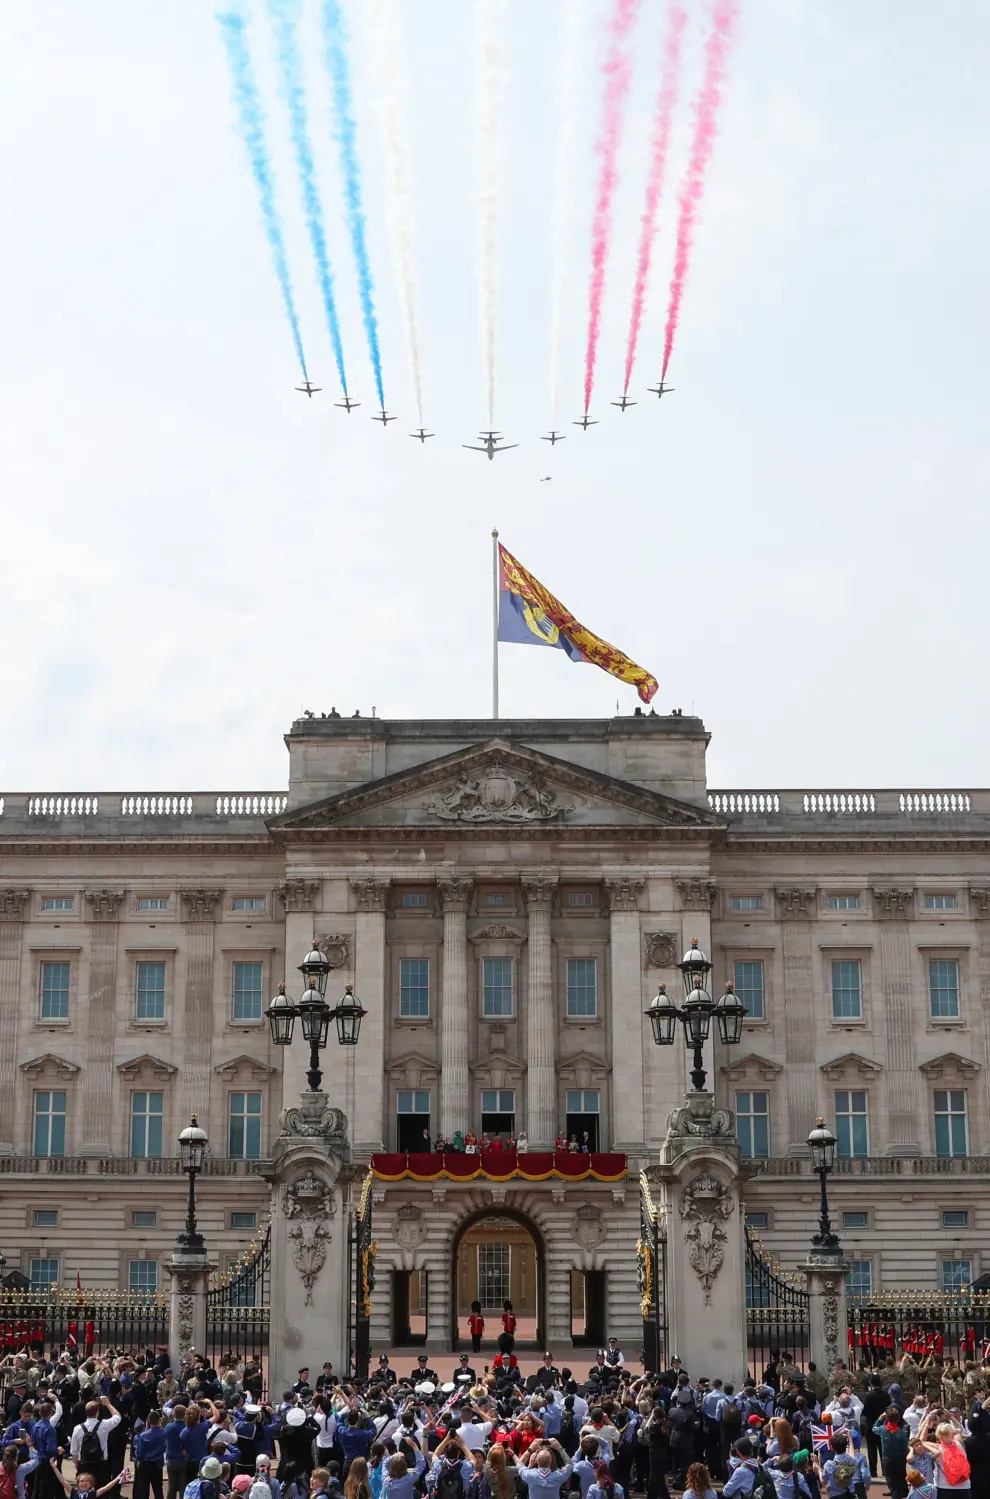 Britain's King Charles, Queen Camilla, Prince William, Catherine, Princess of Wales, Prince George, Princess Charlotte, Prince Louis, Prince Edward, Duke of Edinburgh and Sophie, Duchess of Edinburgh, Anne, Princess Royal and Sir Timothy Laurence appear on the balcony of Buckingham Palace as part of Trooping the Colour parade to honour Britain's King Charles on his official birthday in London, Britain, June 17, 2023. REUTERS/Toby Melville BRITAIN-ROYALS/KING-BIRTHDAY